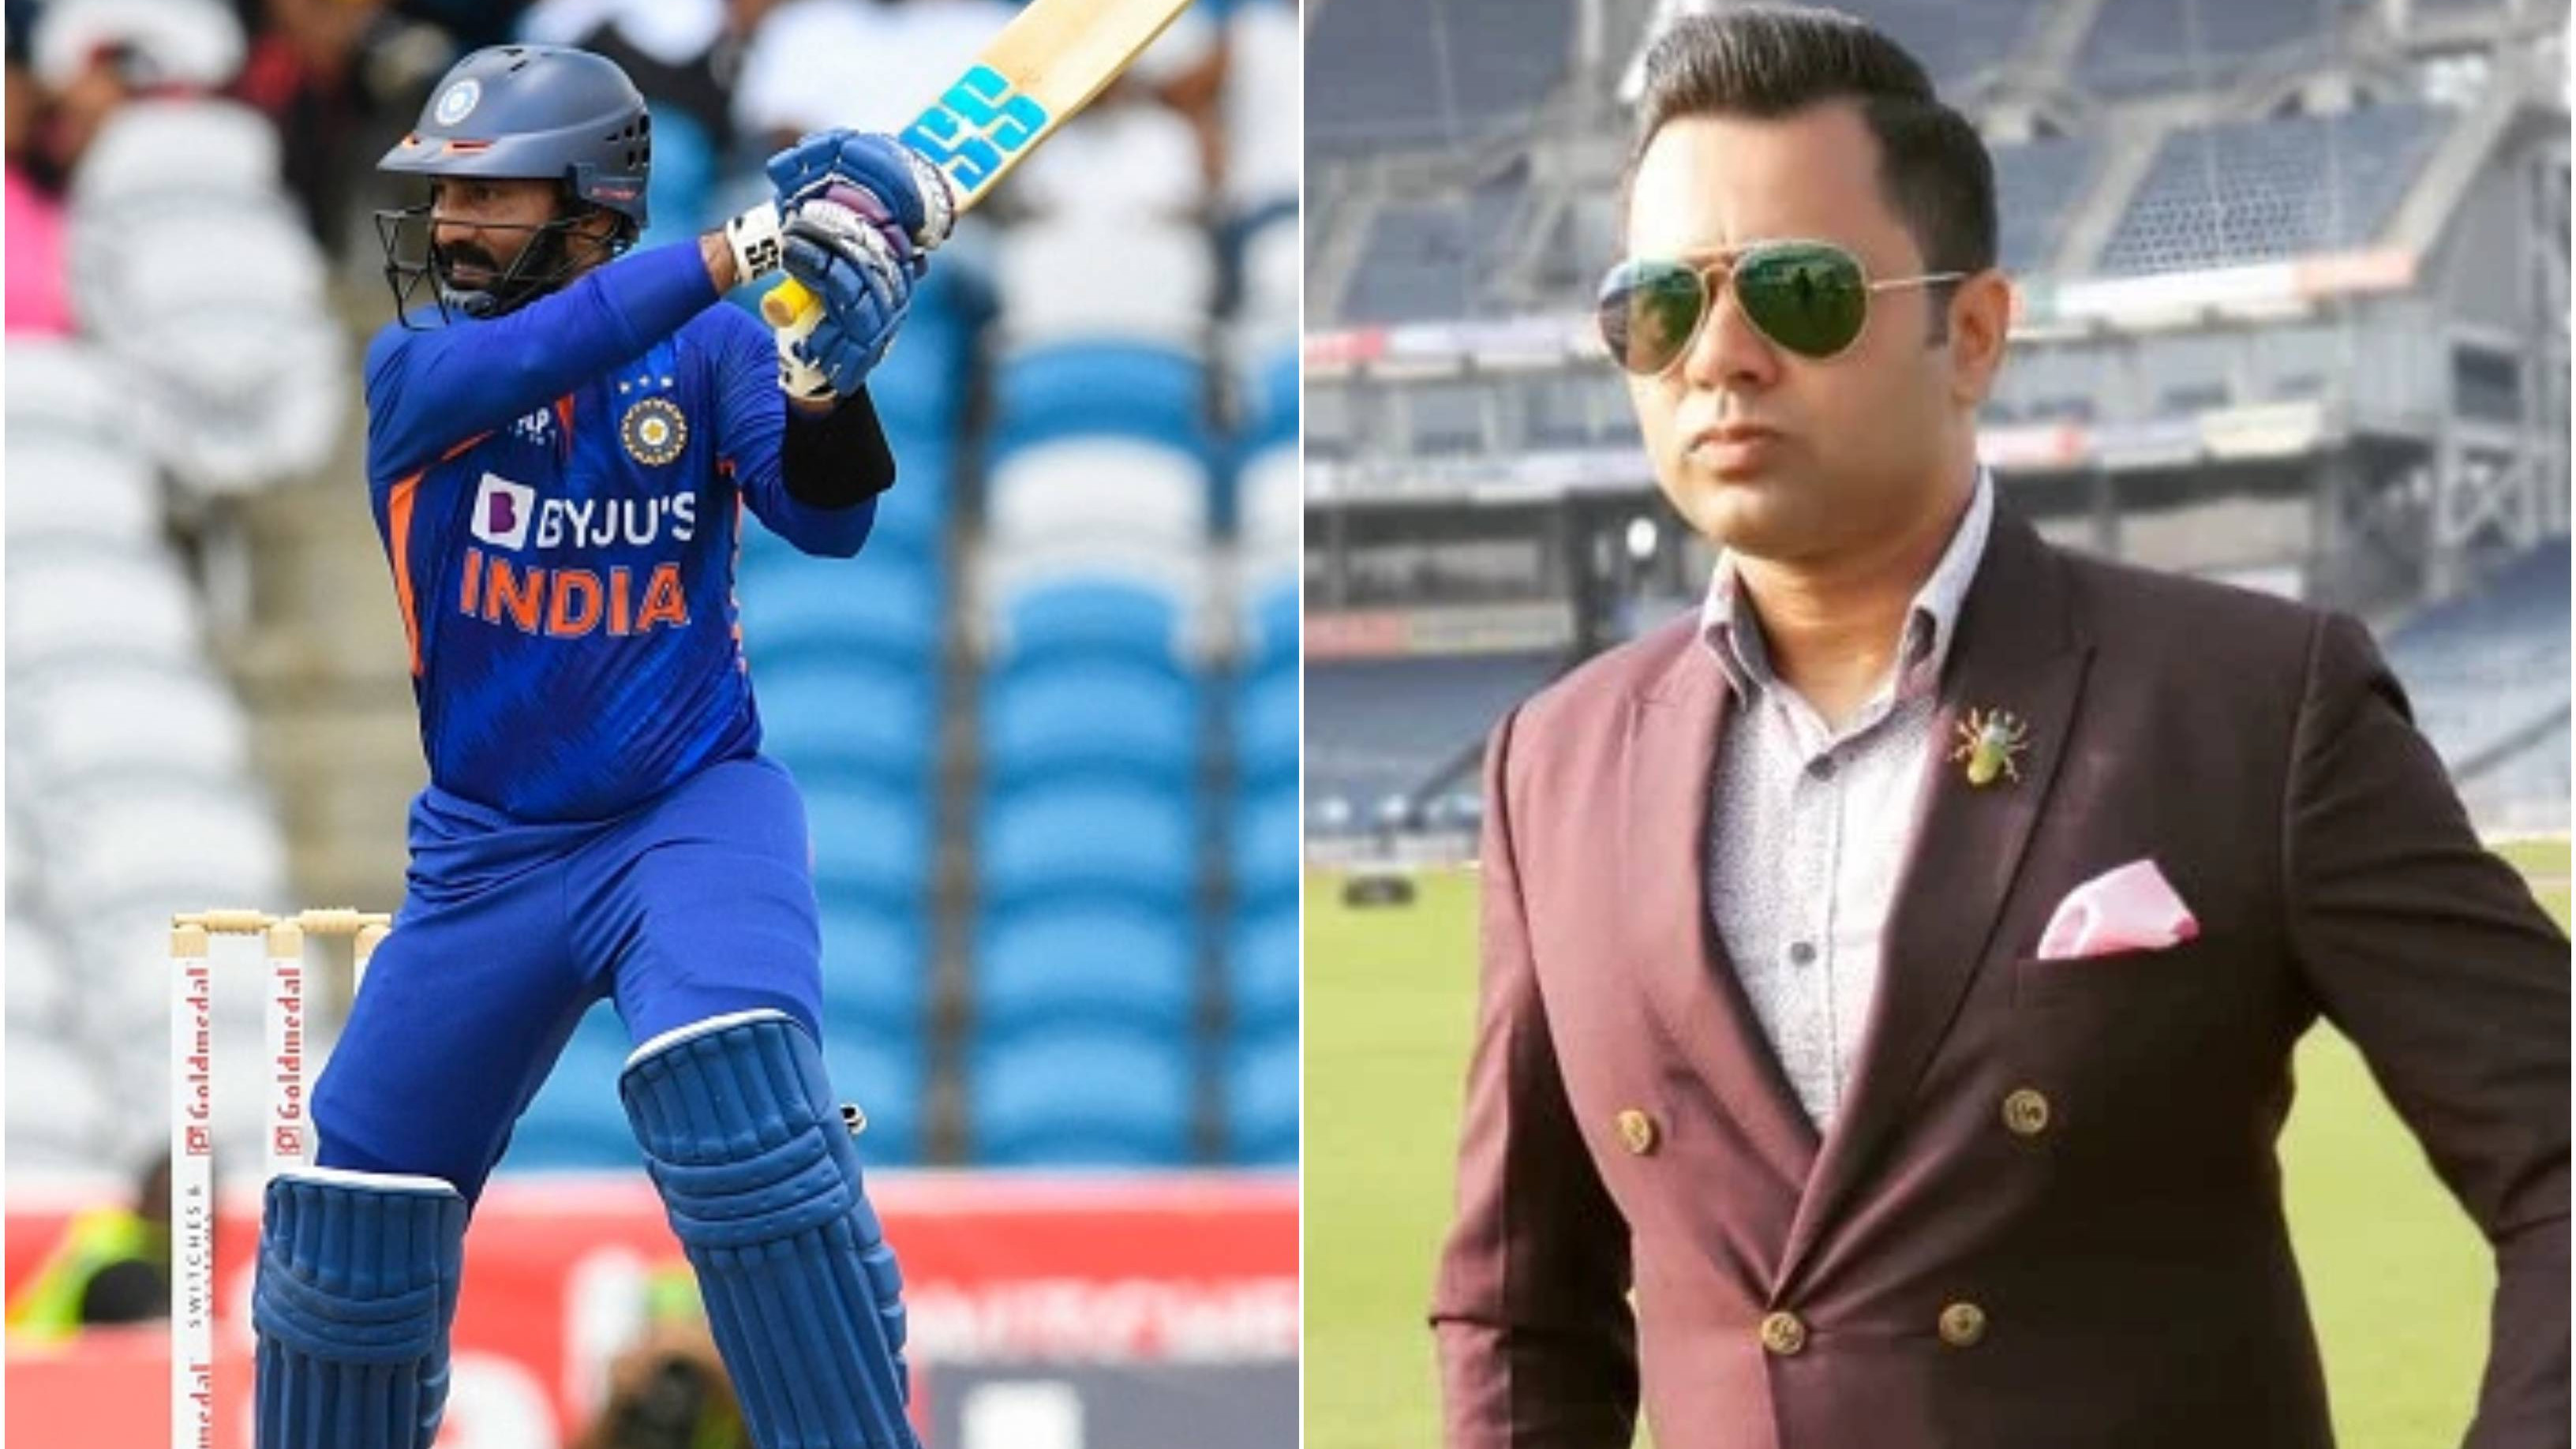 WI v IND 2022: “Stats tell us a few things but hide a lot”, Aakash Chopra hails Dinesh Karthik's knock in 1st T20I